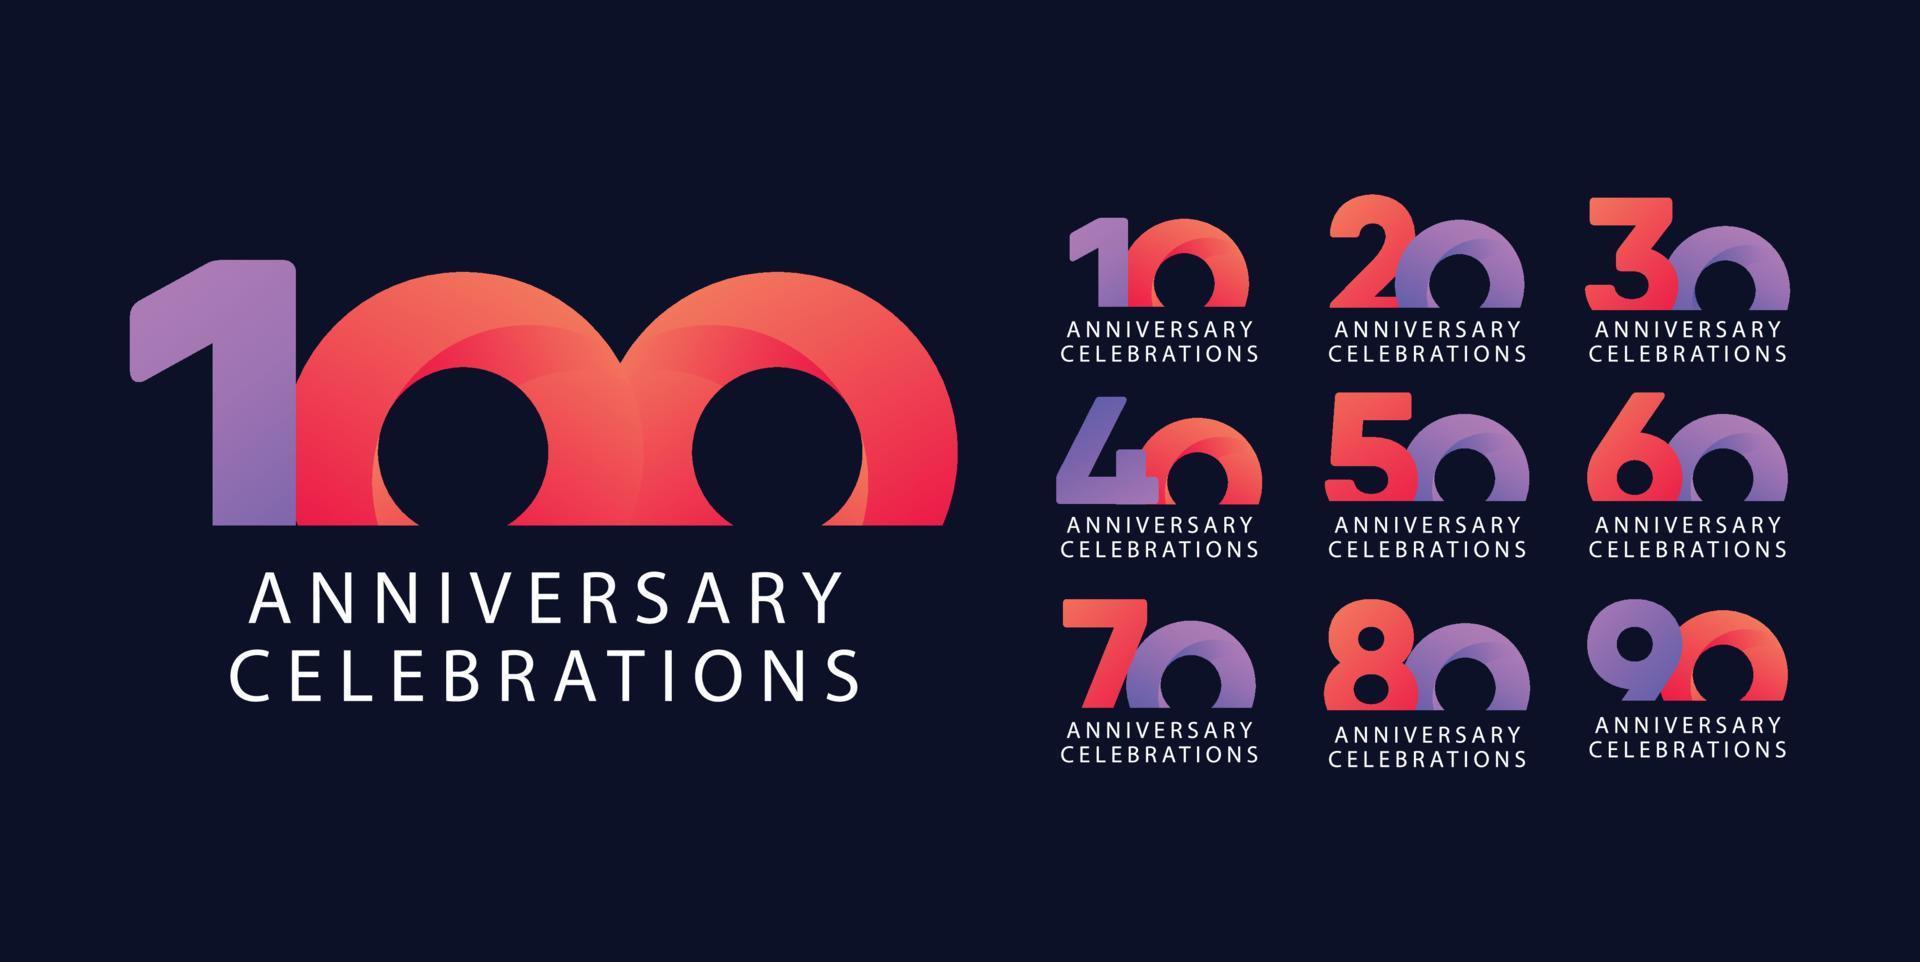 Anniversary Logo Colletions design Template vector